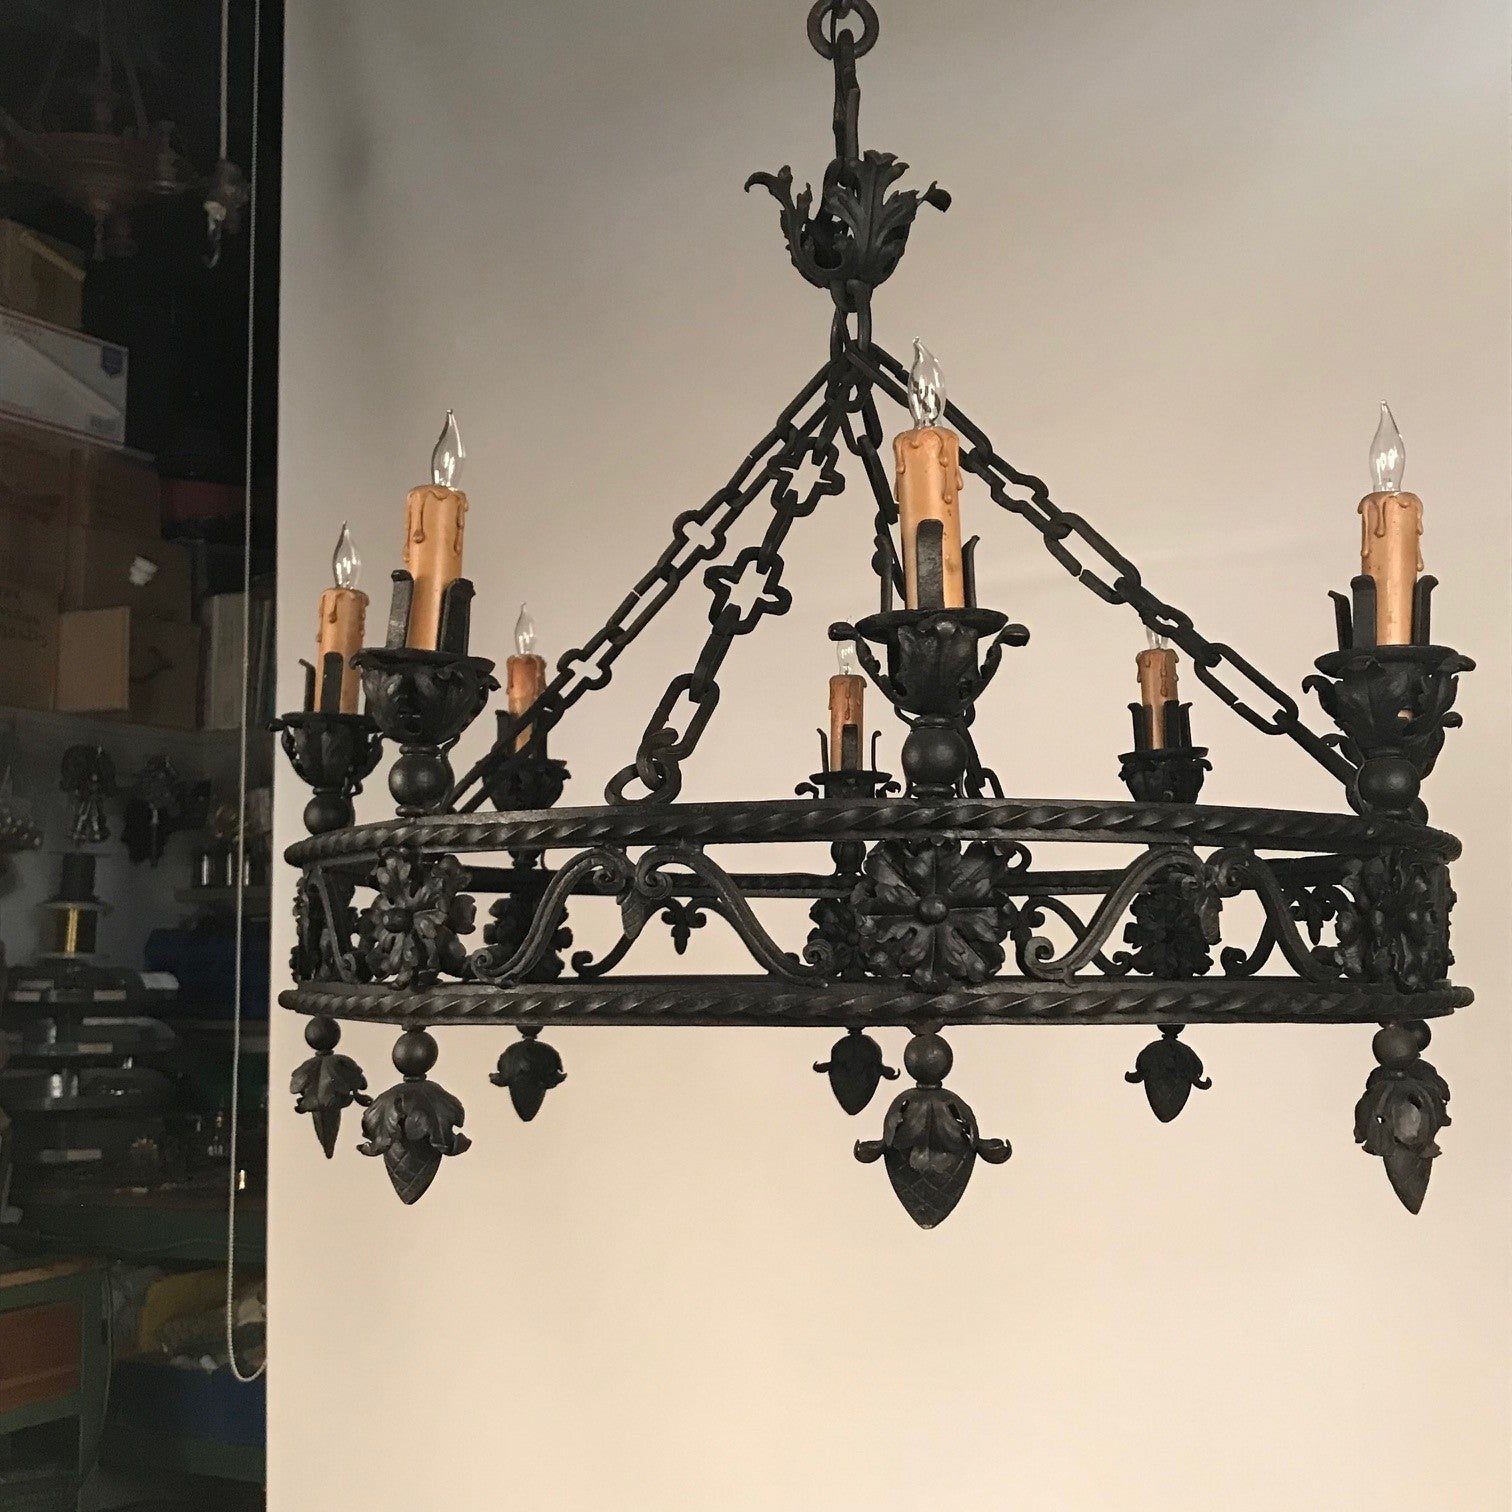 This circular wrought iron chandelier is formed structurally by two round twisted parallel bands connected by scrolling bars and support the eight candle sockets. The whole is ornamented with hand-formed leaves. The leaves, rosettes and pendent